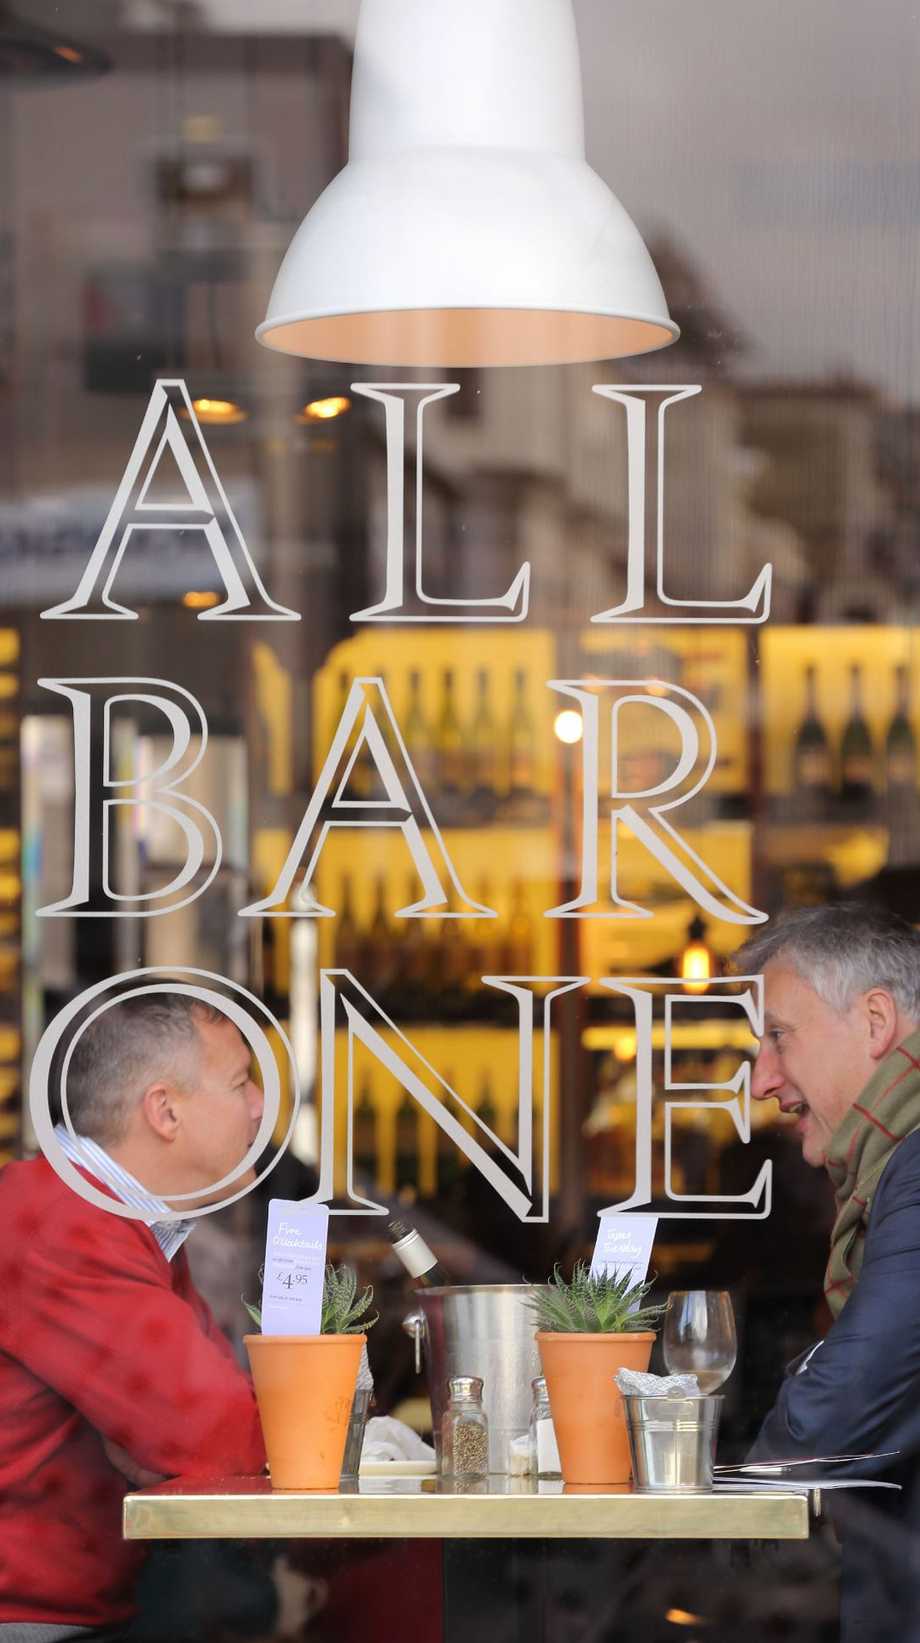 Two men chat at All Bar One, sitting behind the All Bar One logo on the window.